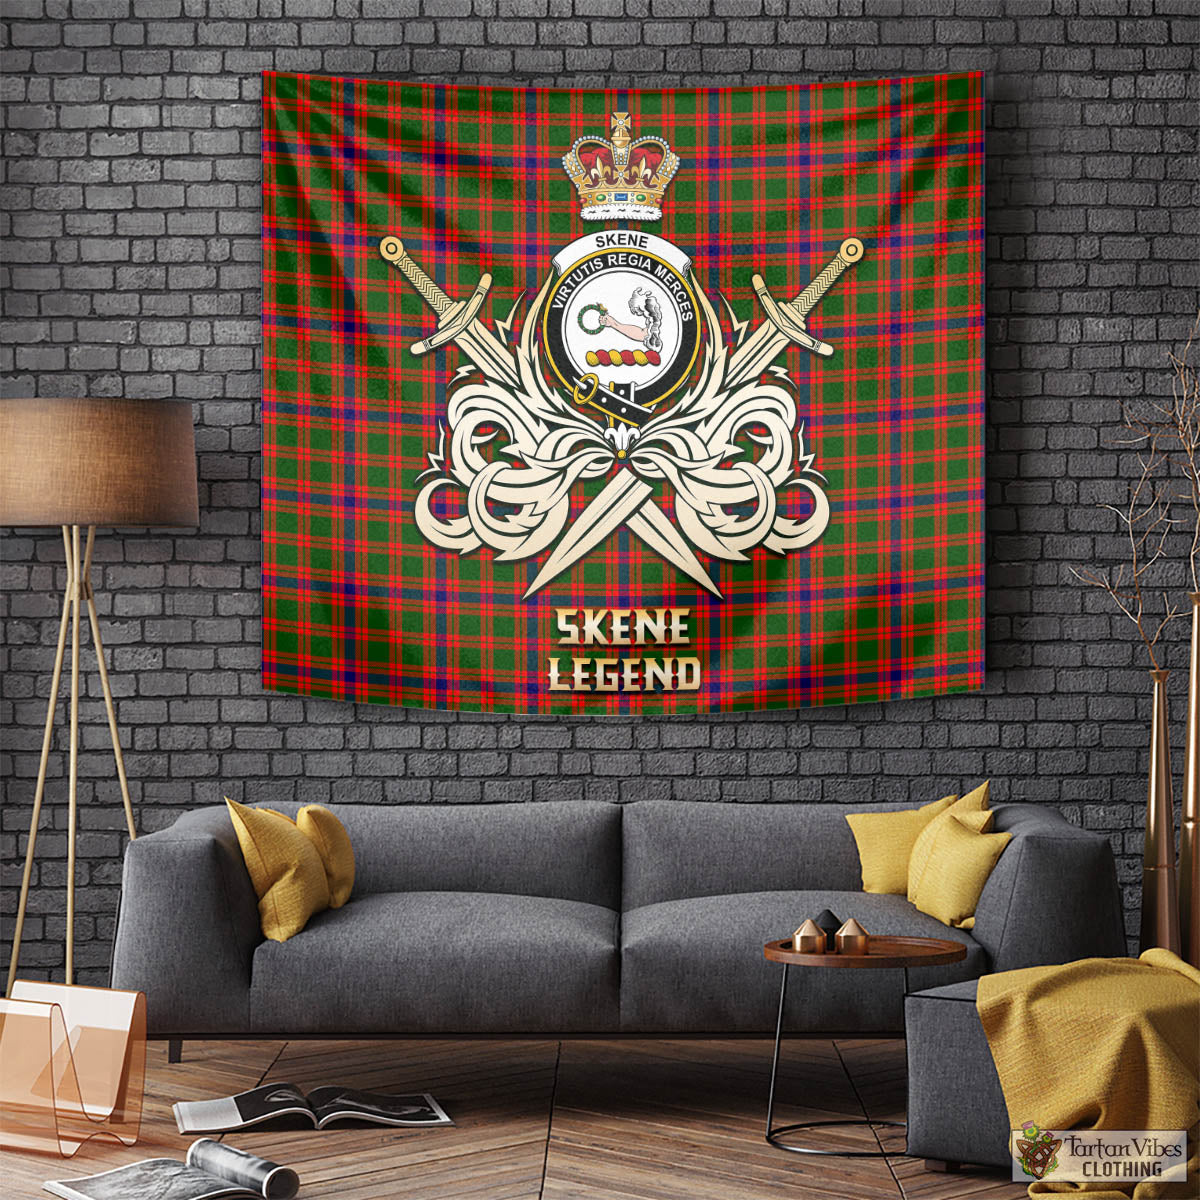 Tartan Vibes Clothing Skene Modern Tartan Tapestry with Clan Crest and the Golden Sword of Courageous Legacy